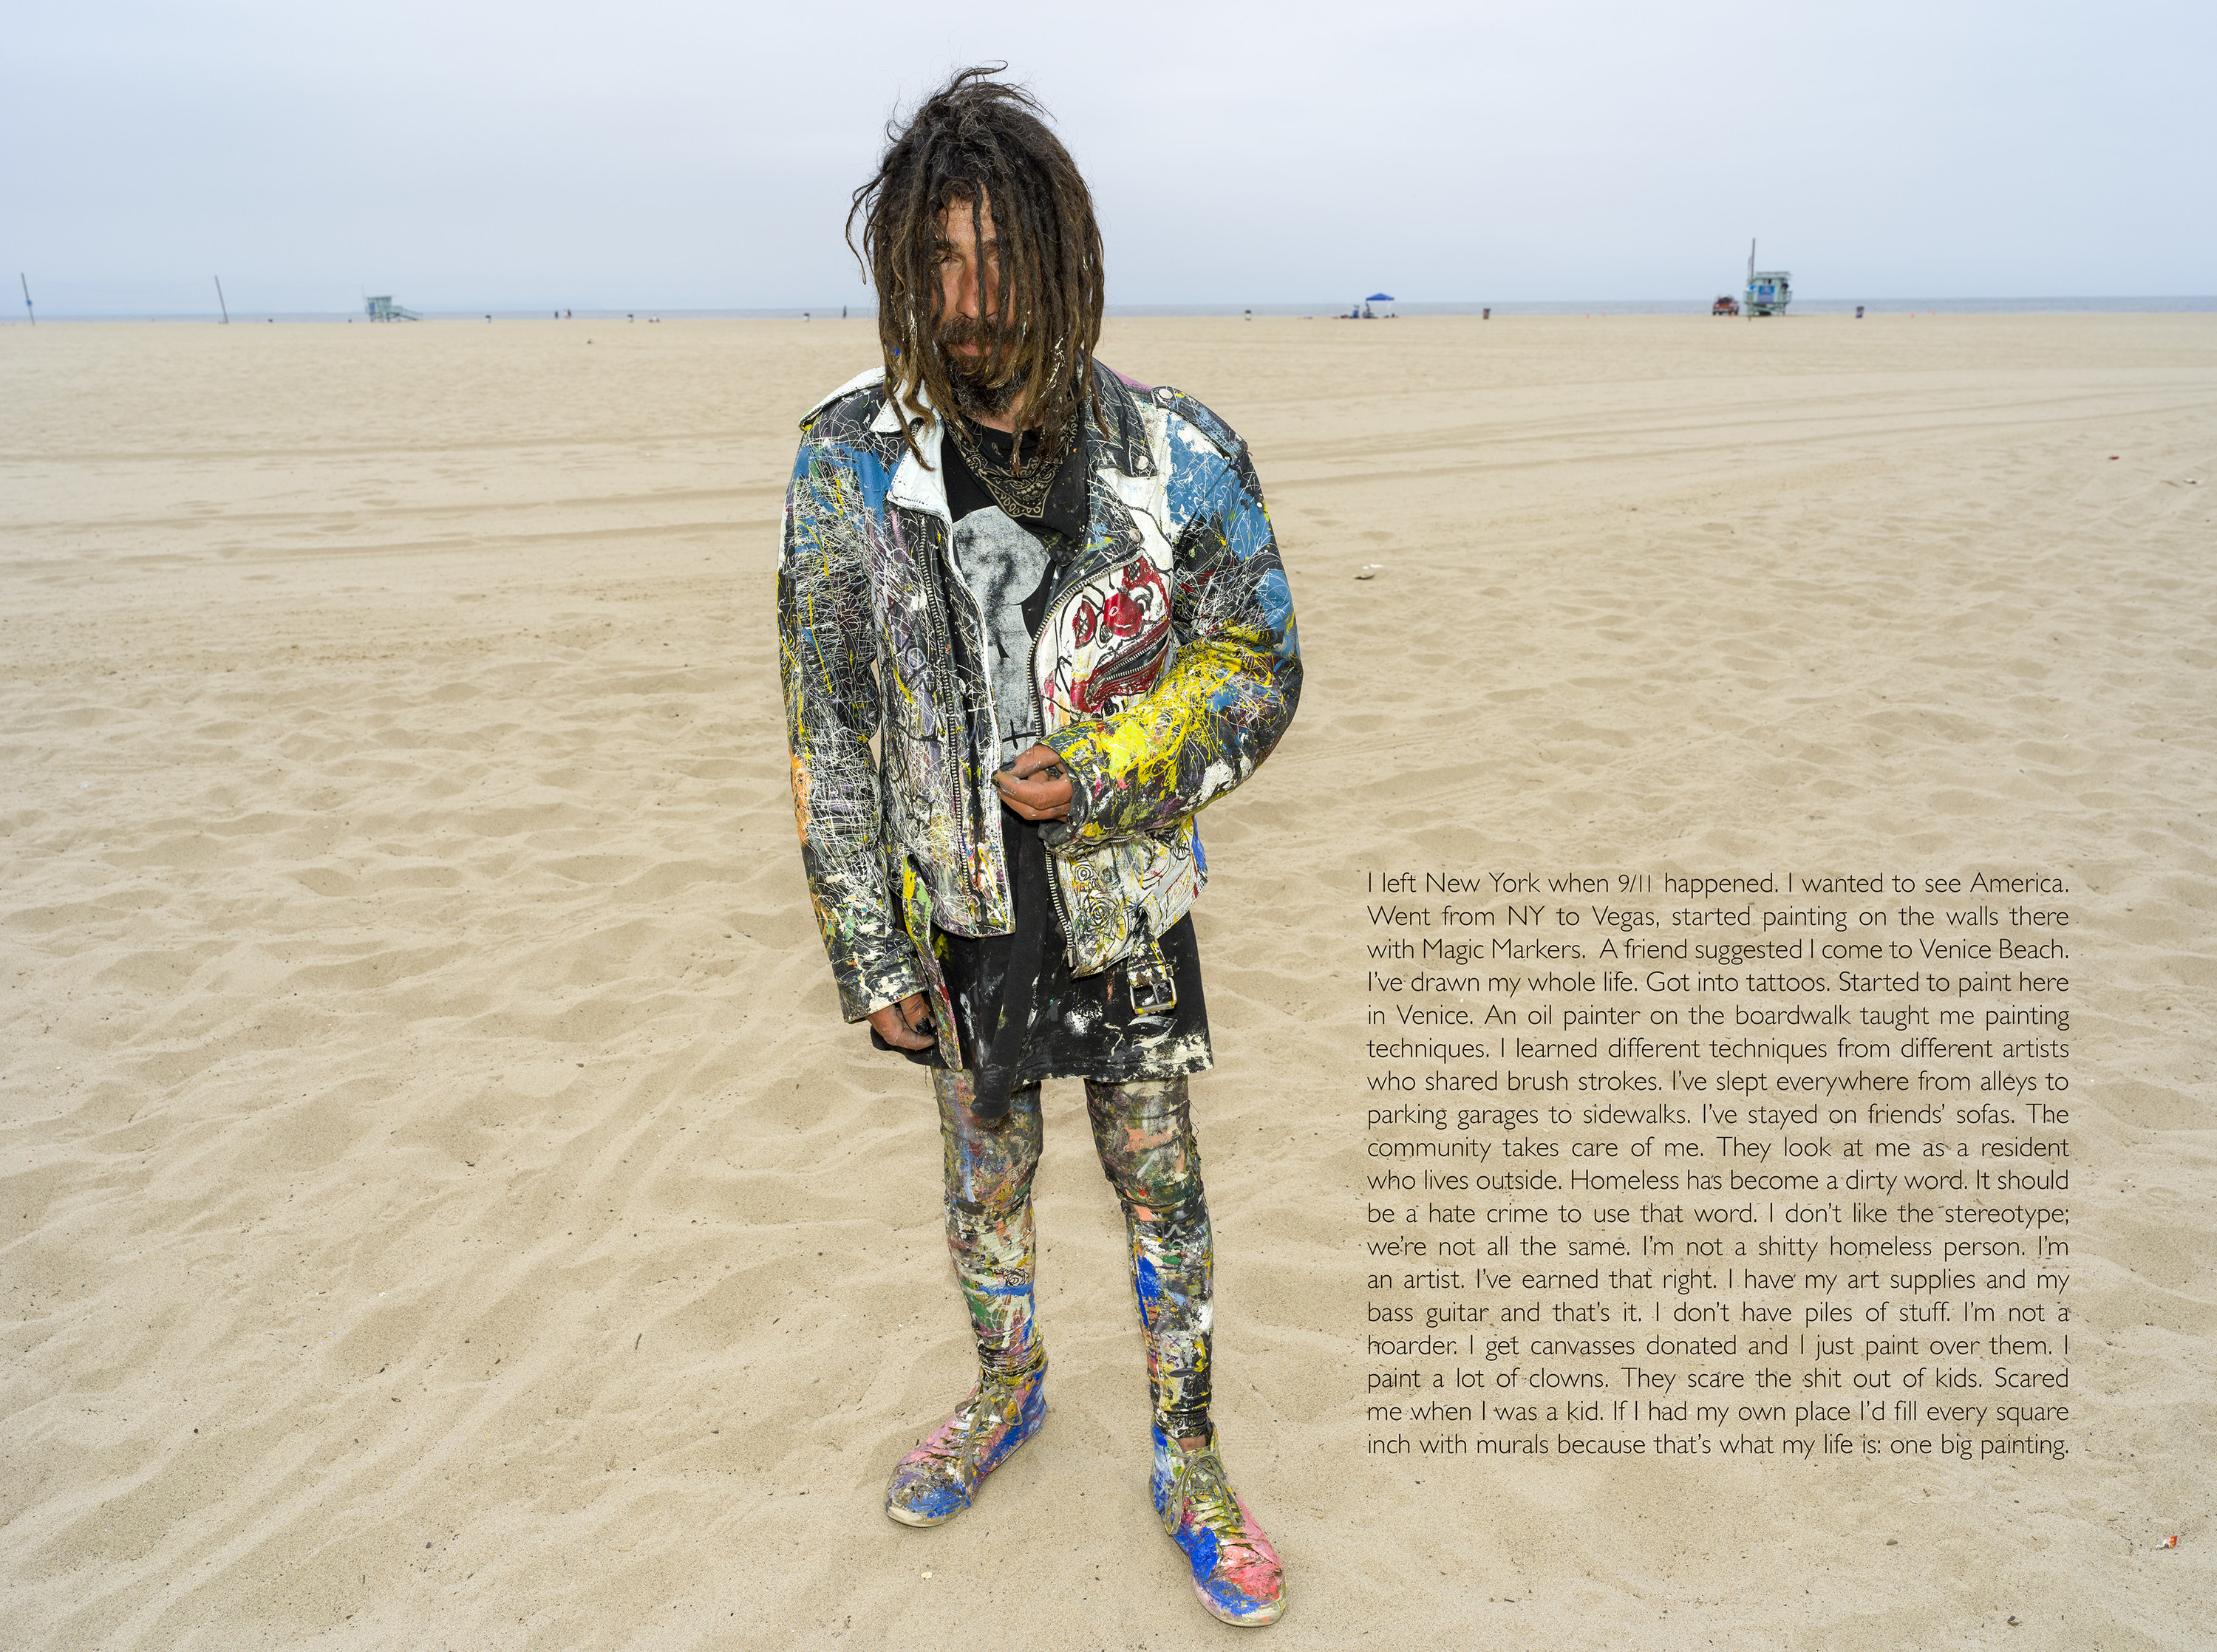 A man wearing paint-splattered clothing stands on a beach